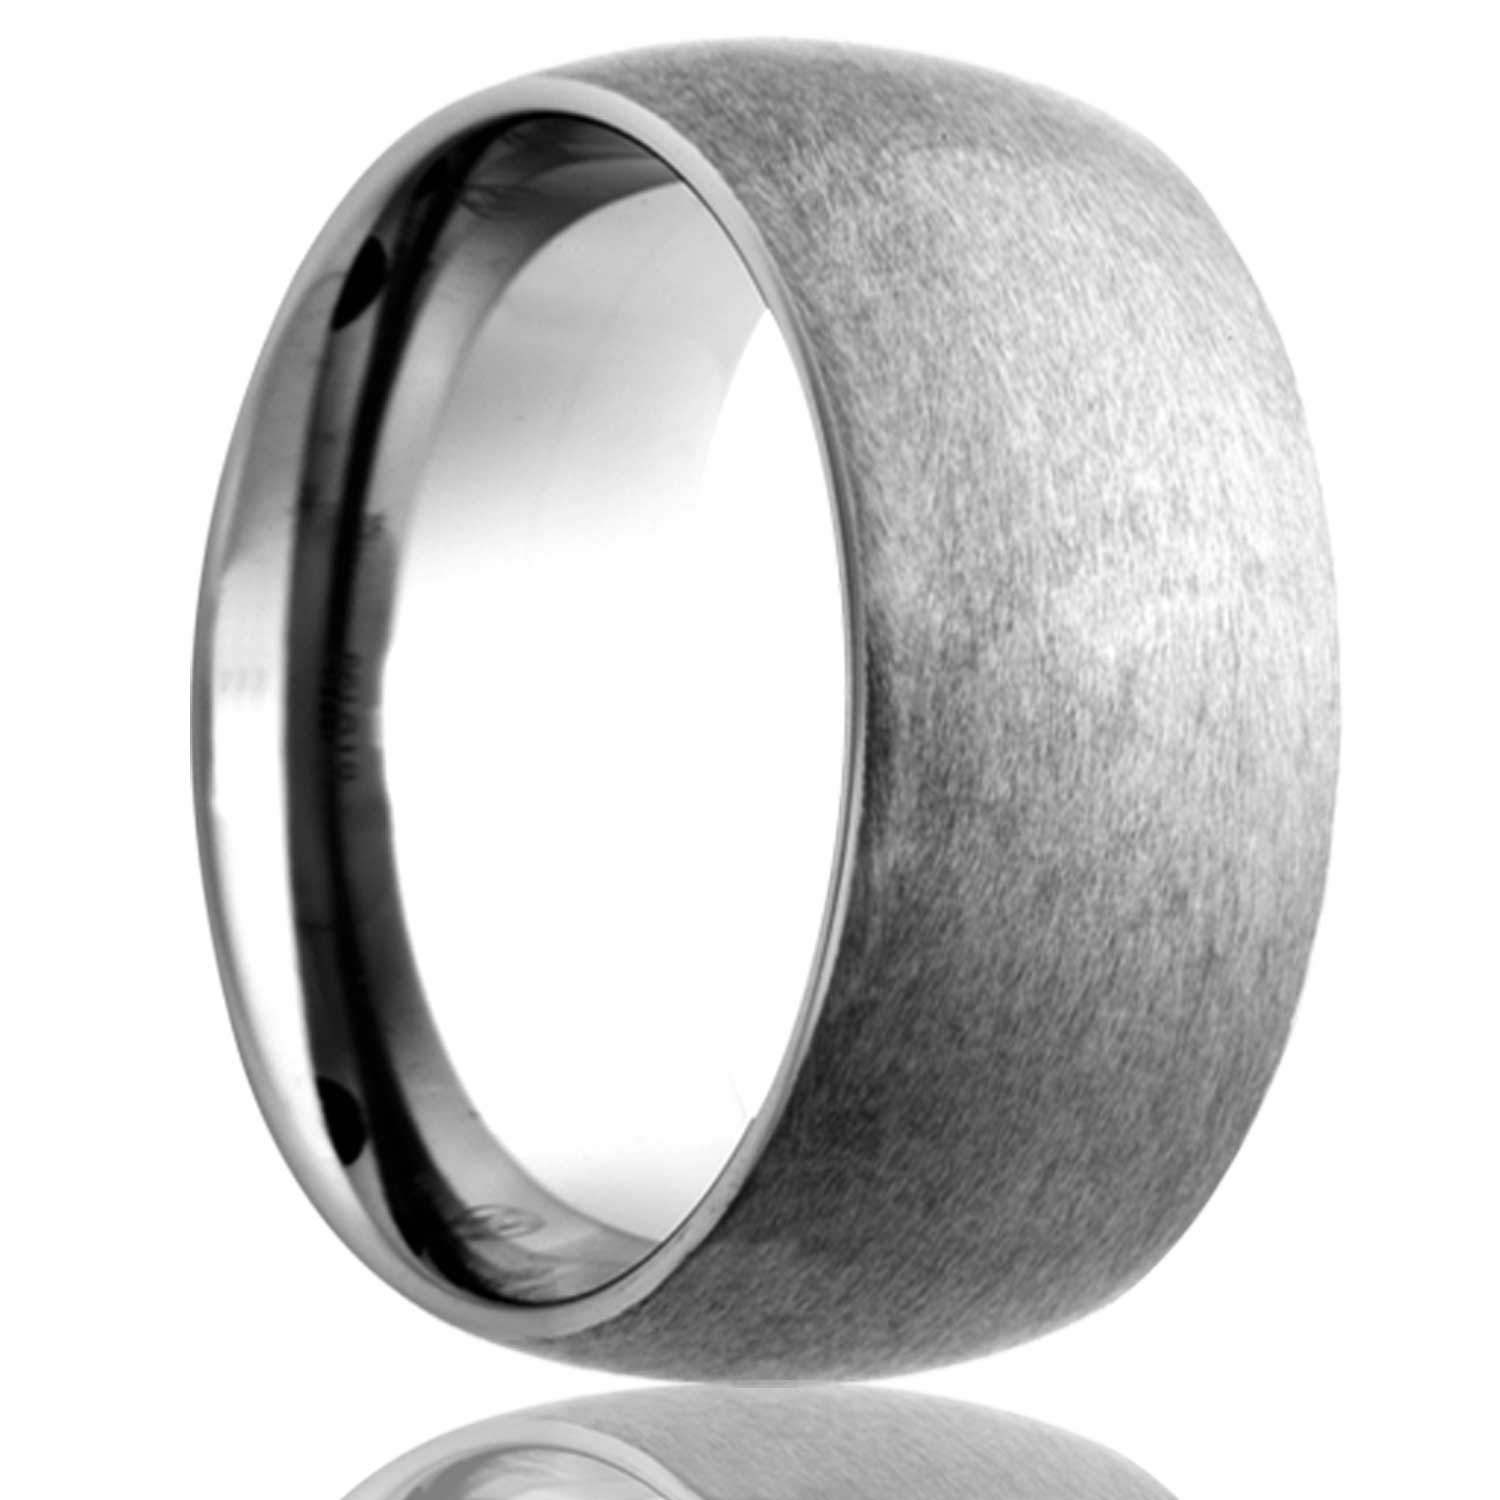 A domed satin finish tantalum wedding band displayed on a neutral white background.